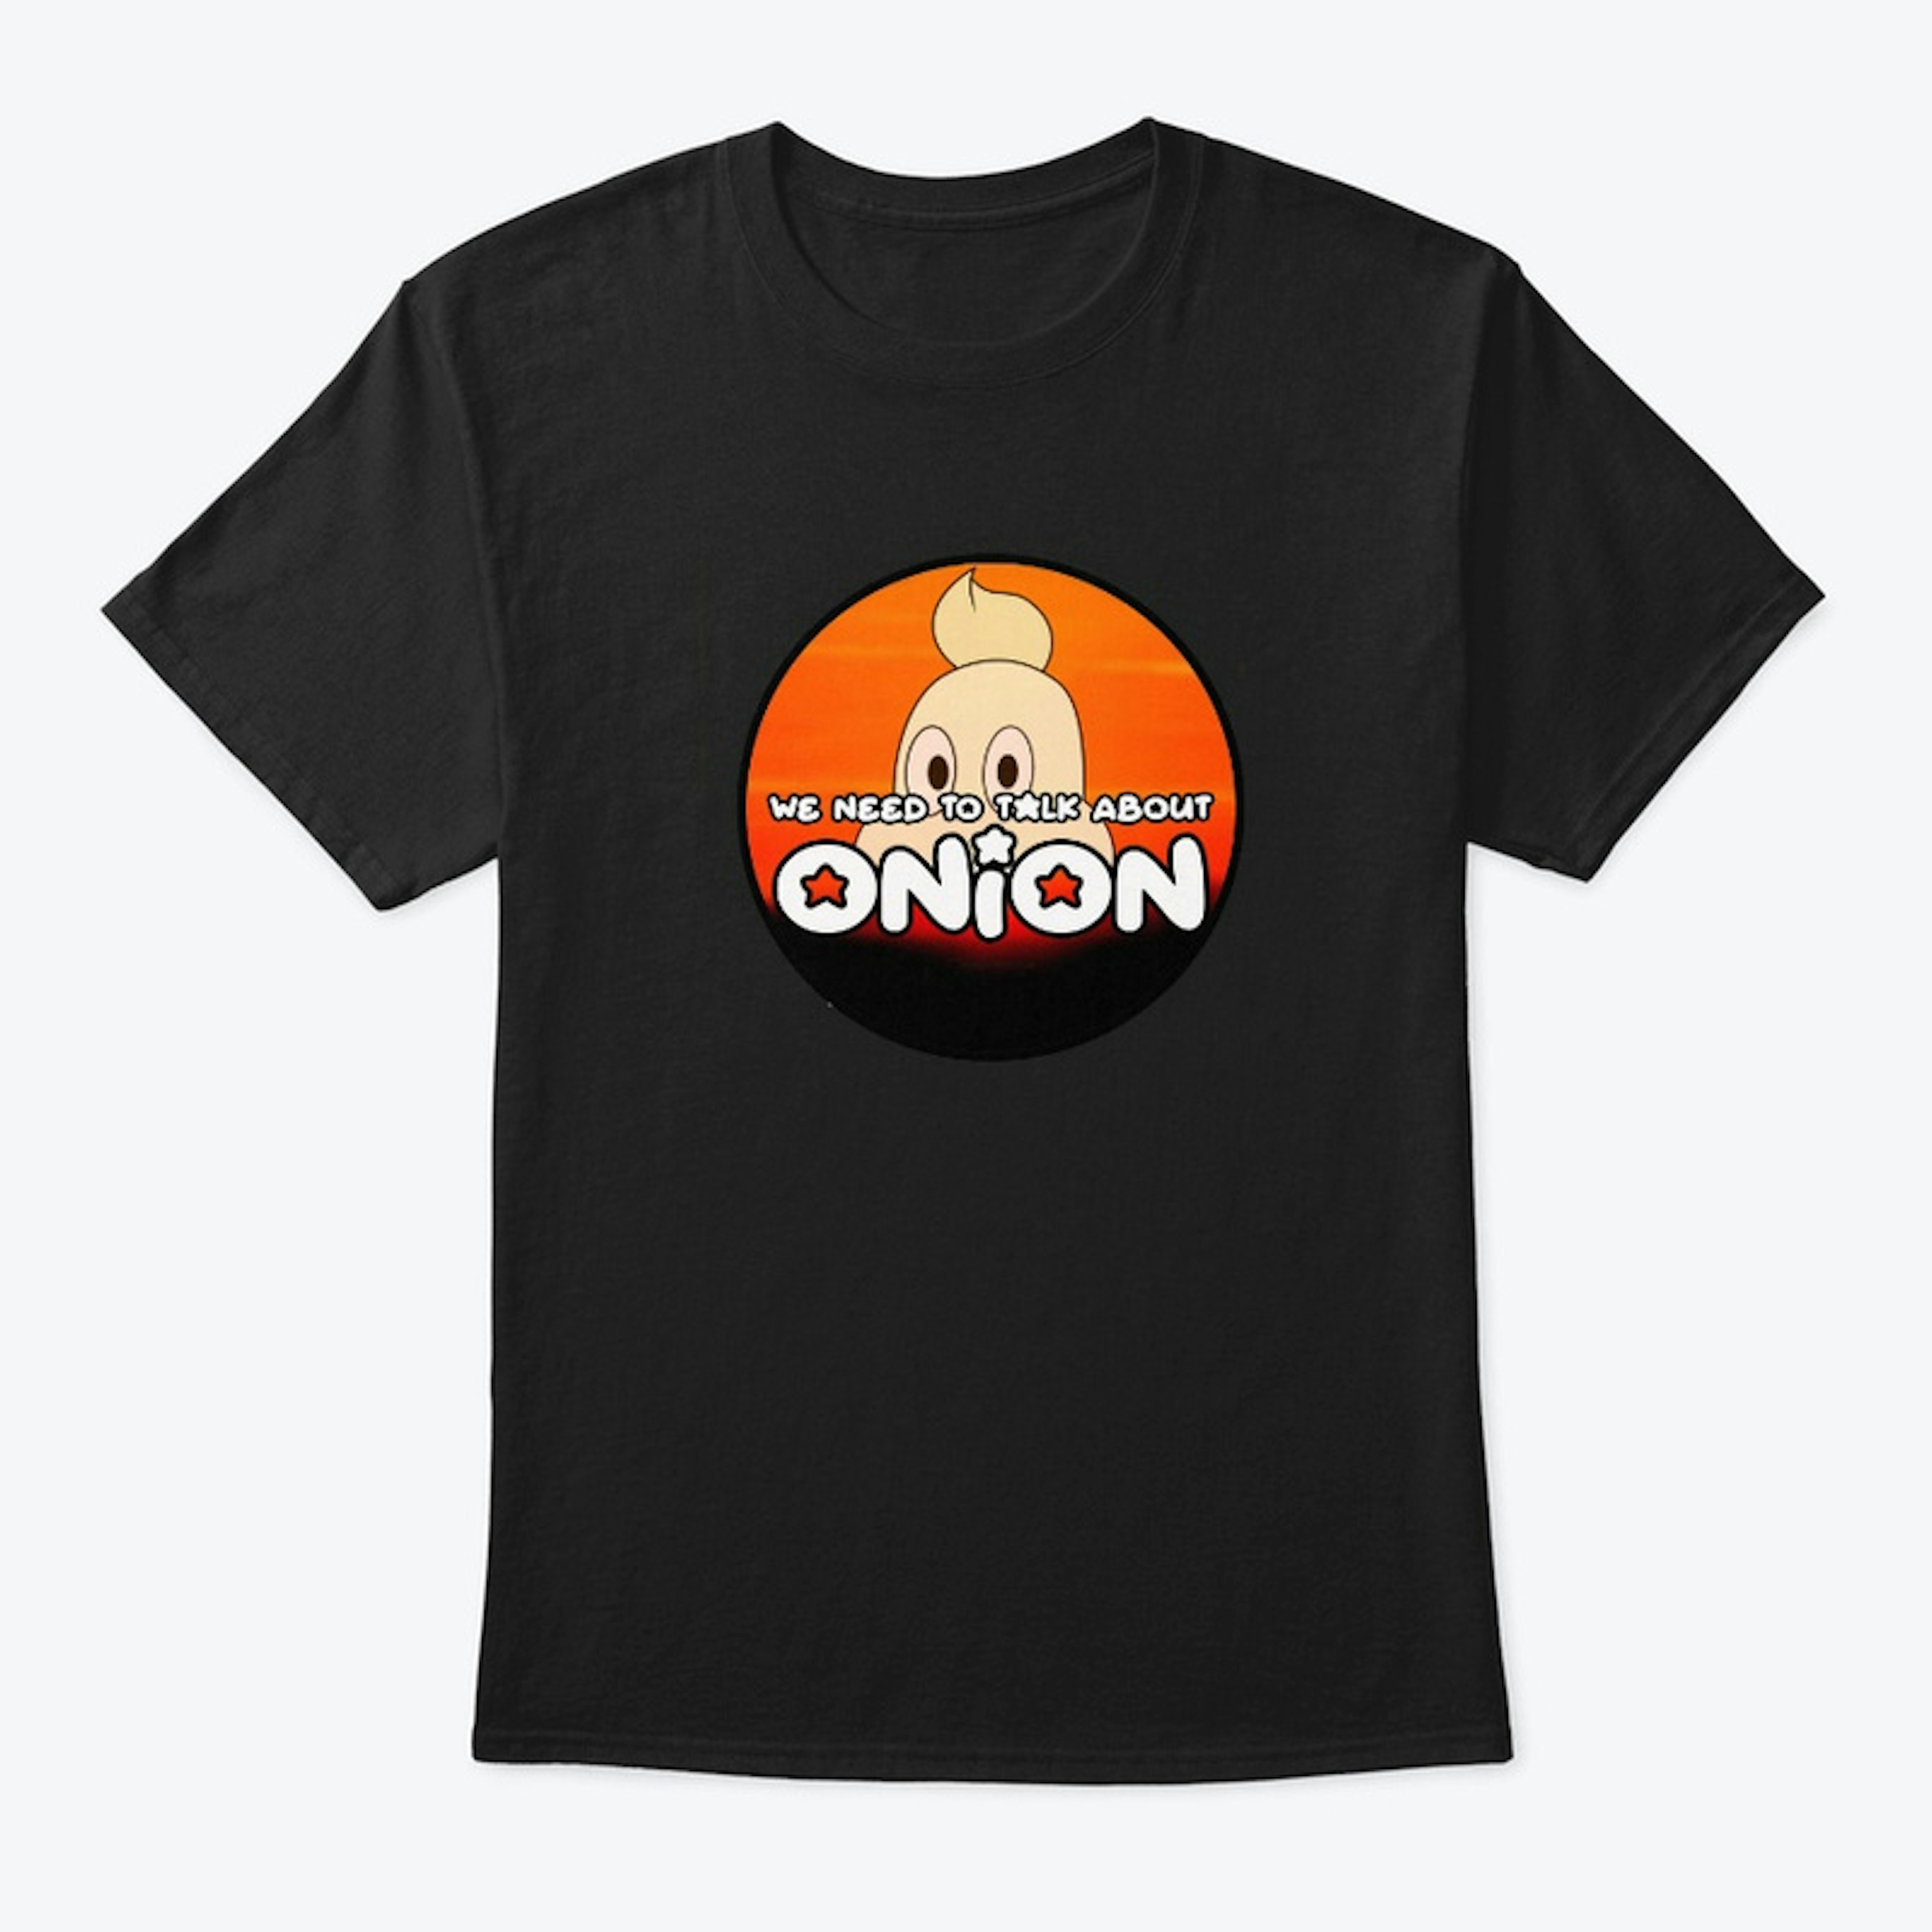 We Need to Talk About Onion